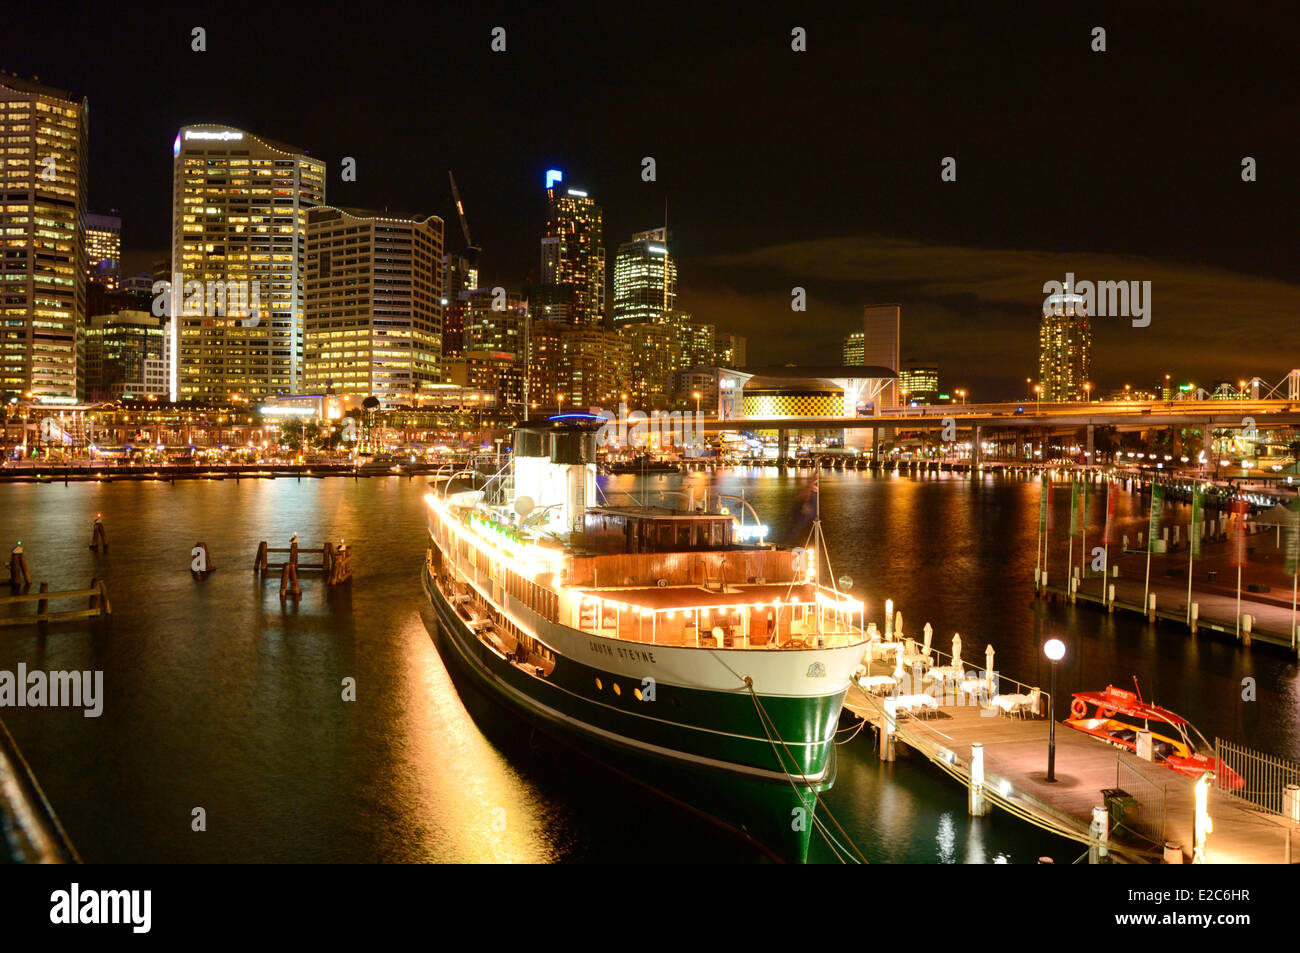 Australia, New South Wales, Sydney, Darling Harbour, Cockle Bay, boat called South Steyne docked at night Stock Photo